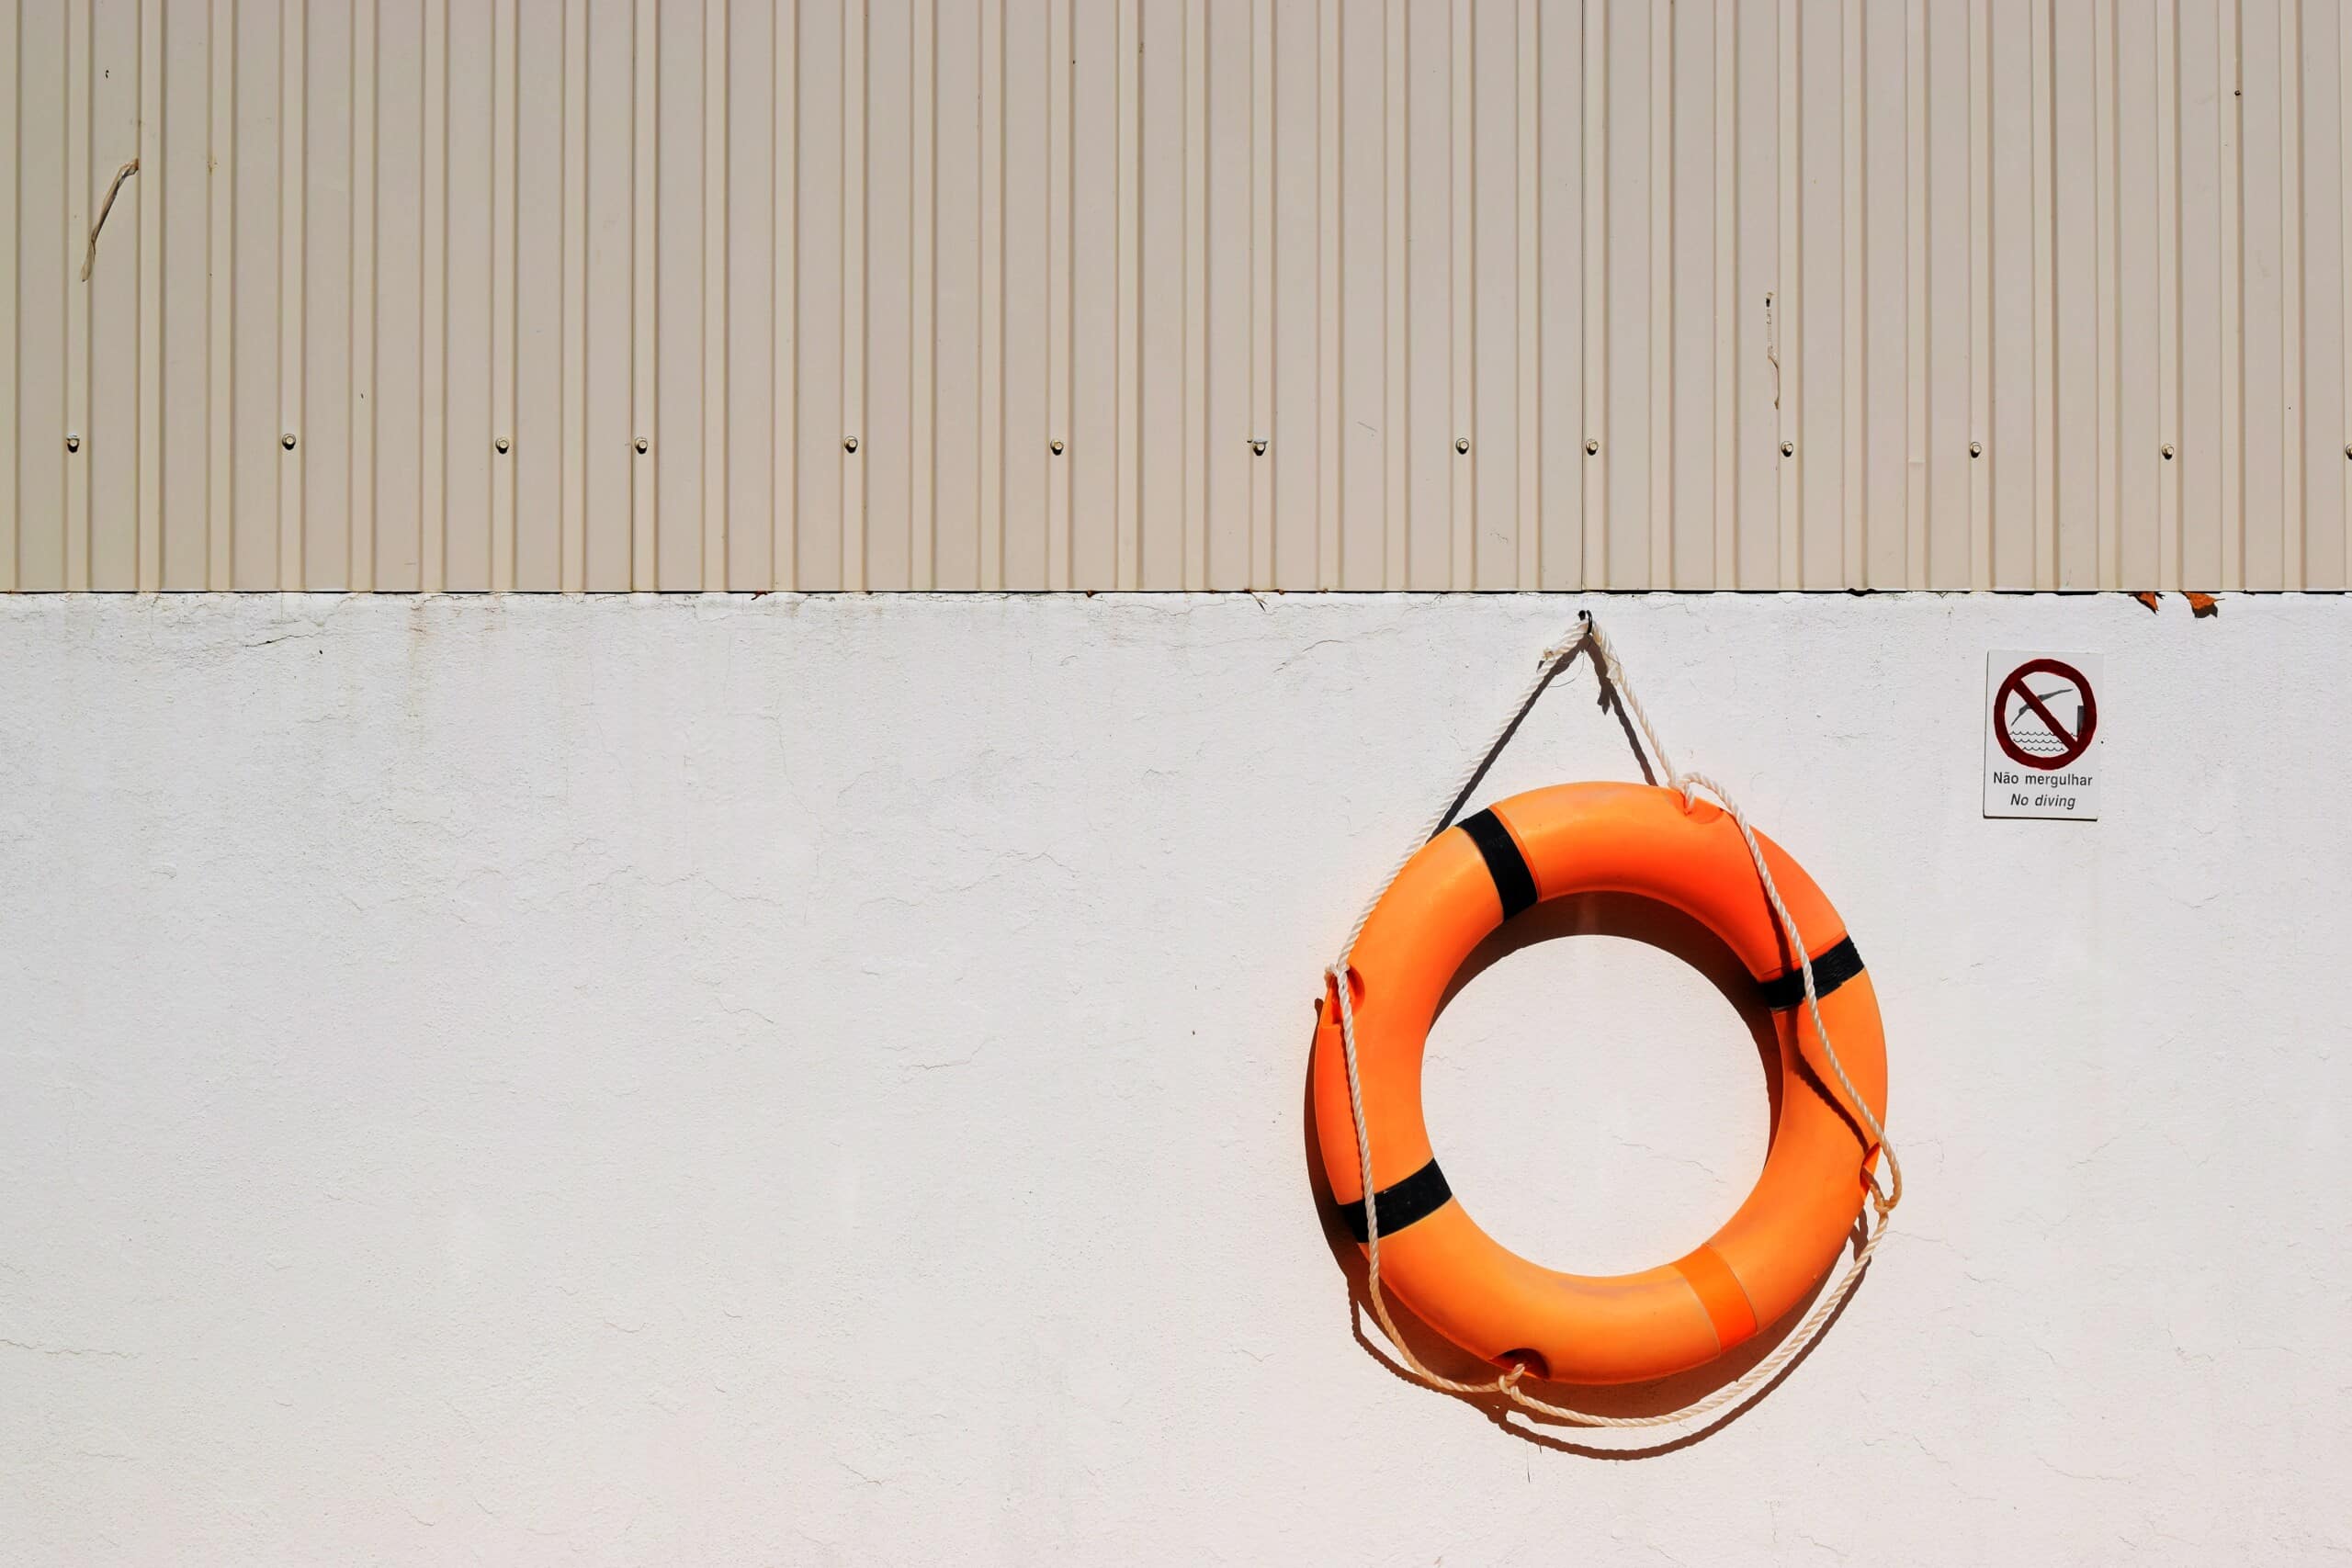 A strategic consulting company with a life preserver on a wall.